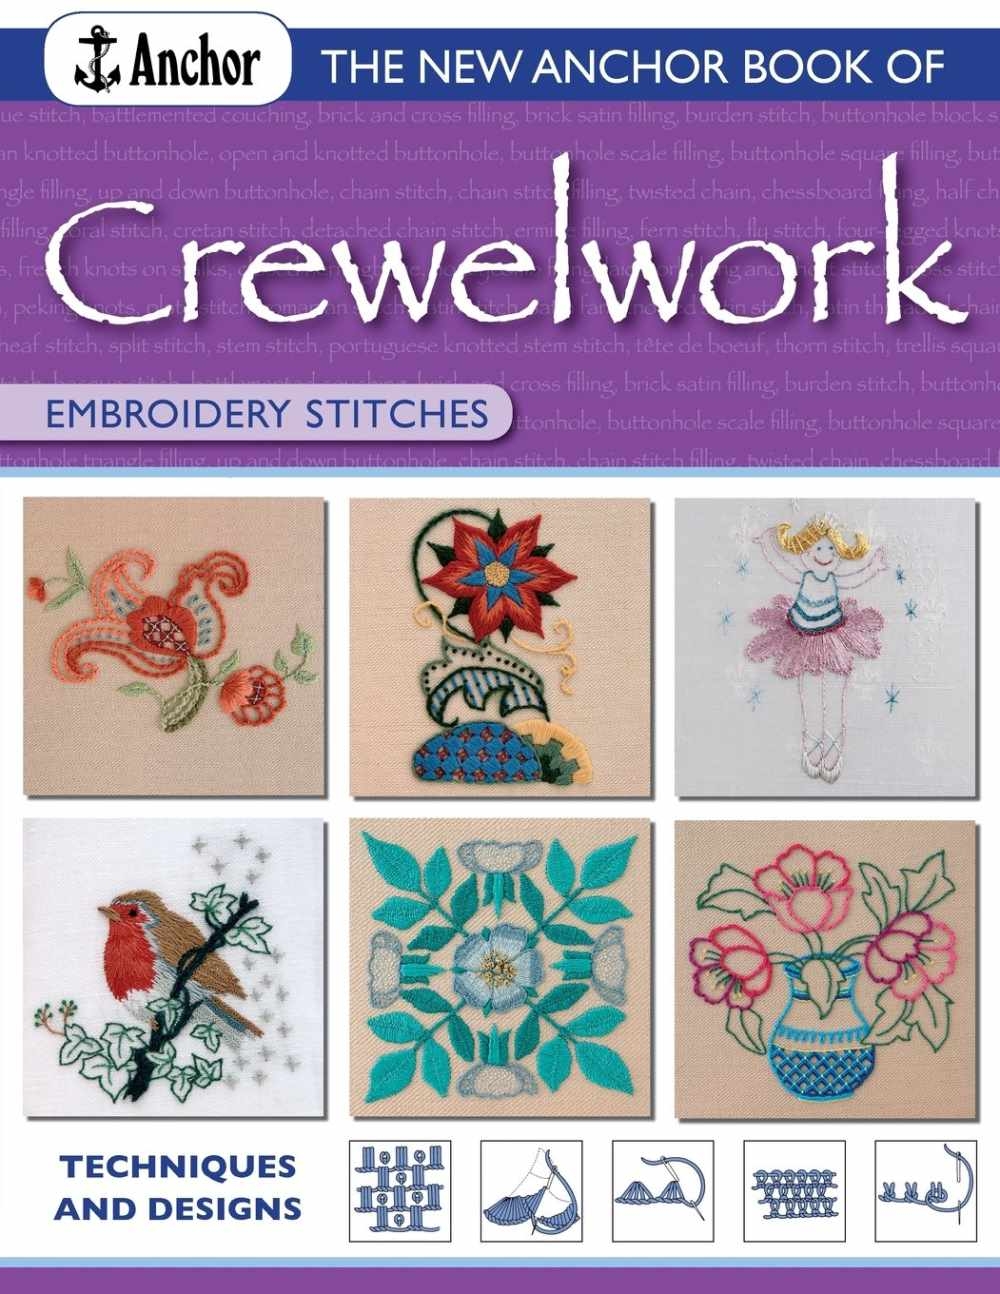 The New Anchor Book of Crewelwork: Embroidery Stitiches